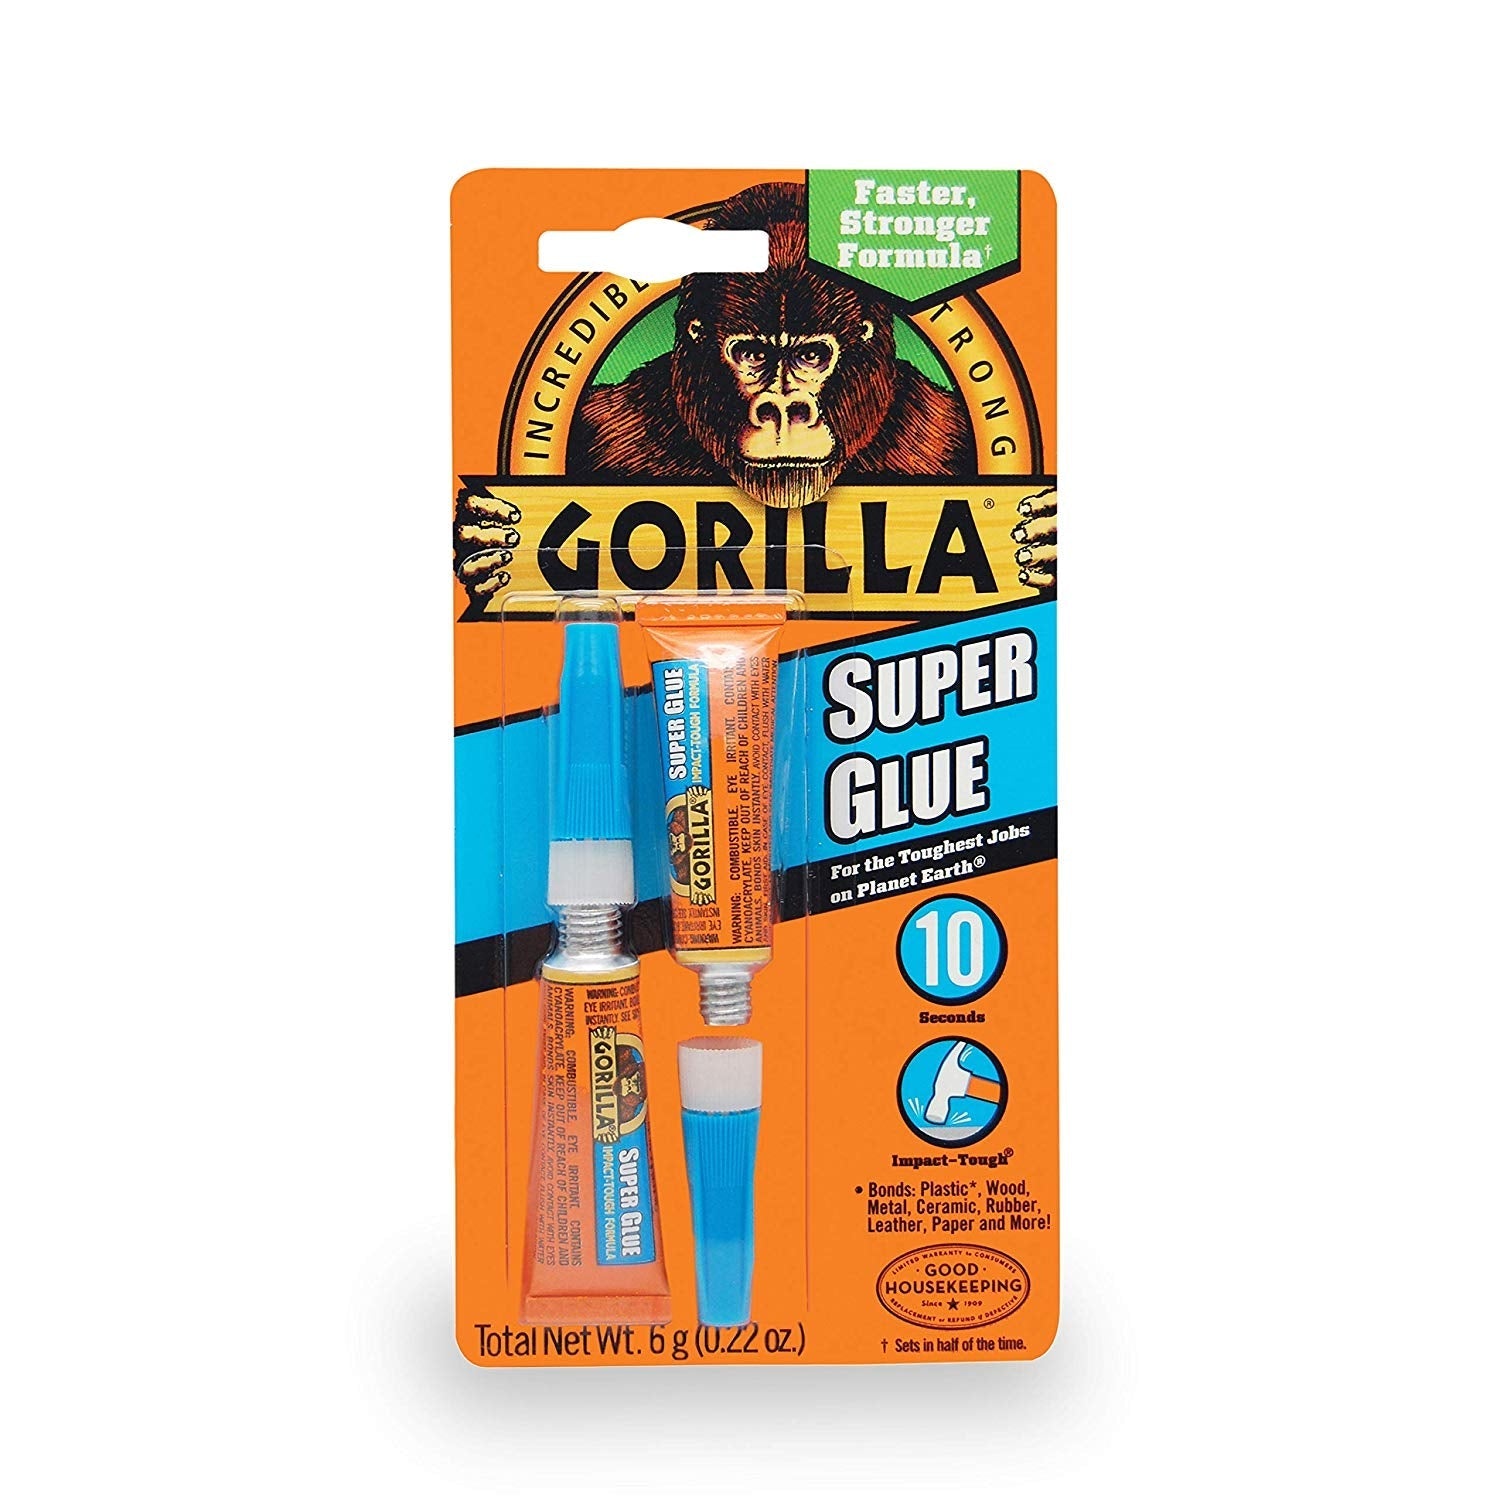 Gorilla Superglue 3g Tube Pack 2's - NWT FM SOLUTIONS - YOUR CATERING WHOLESALER